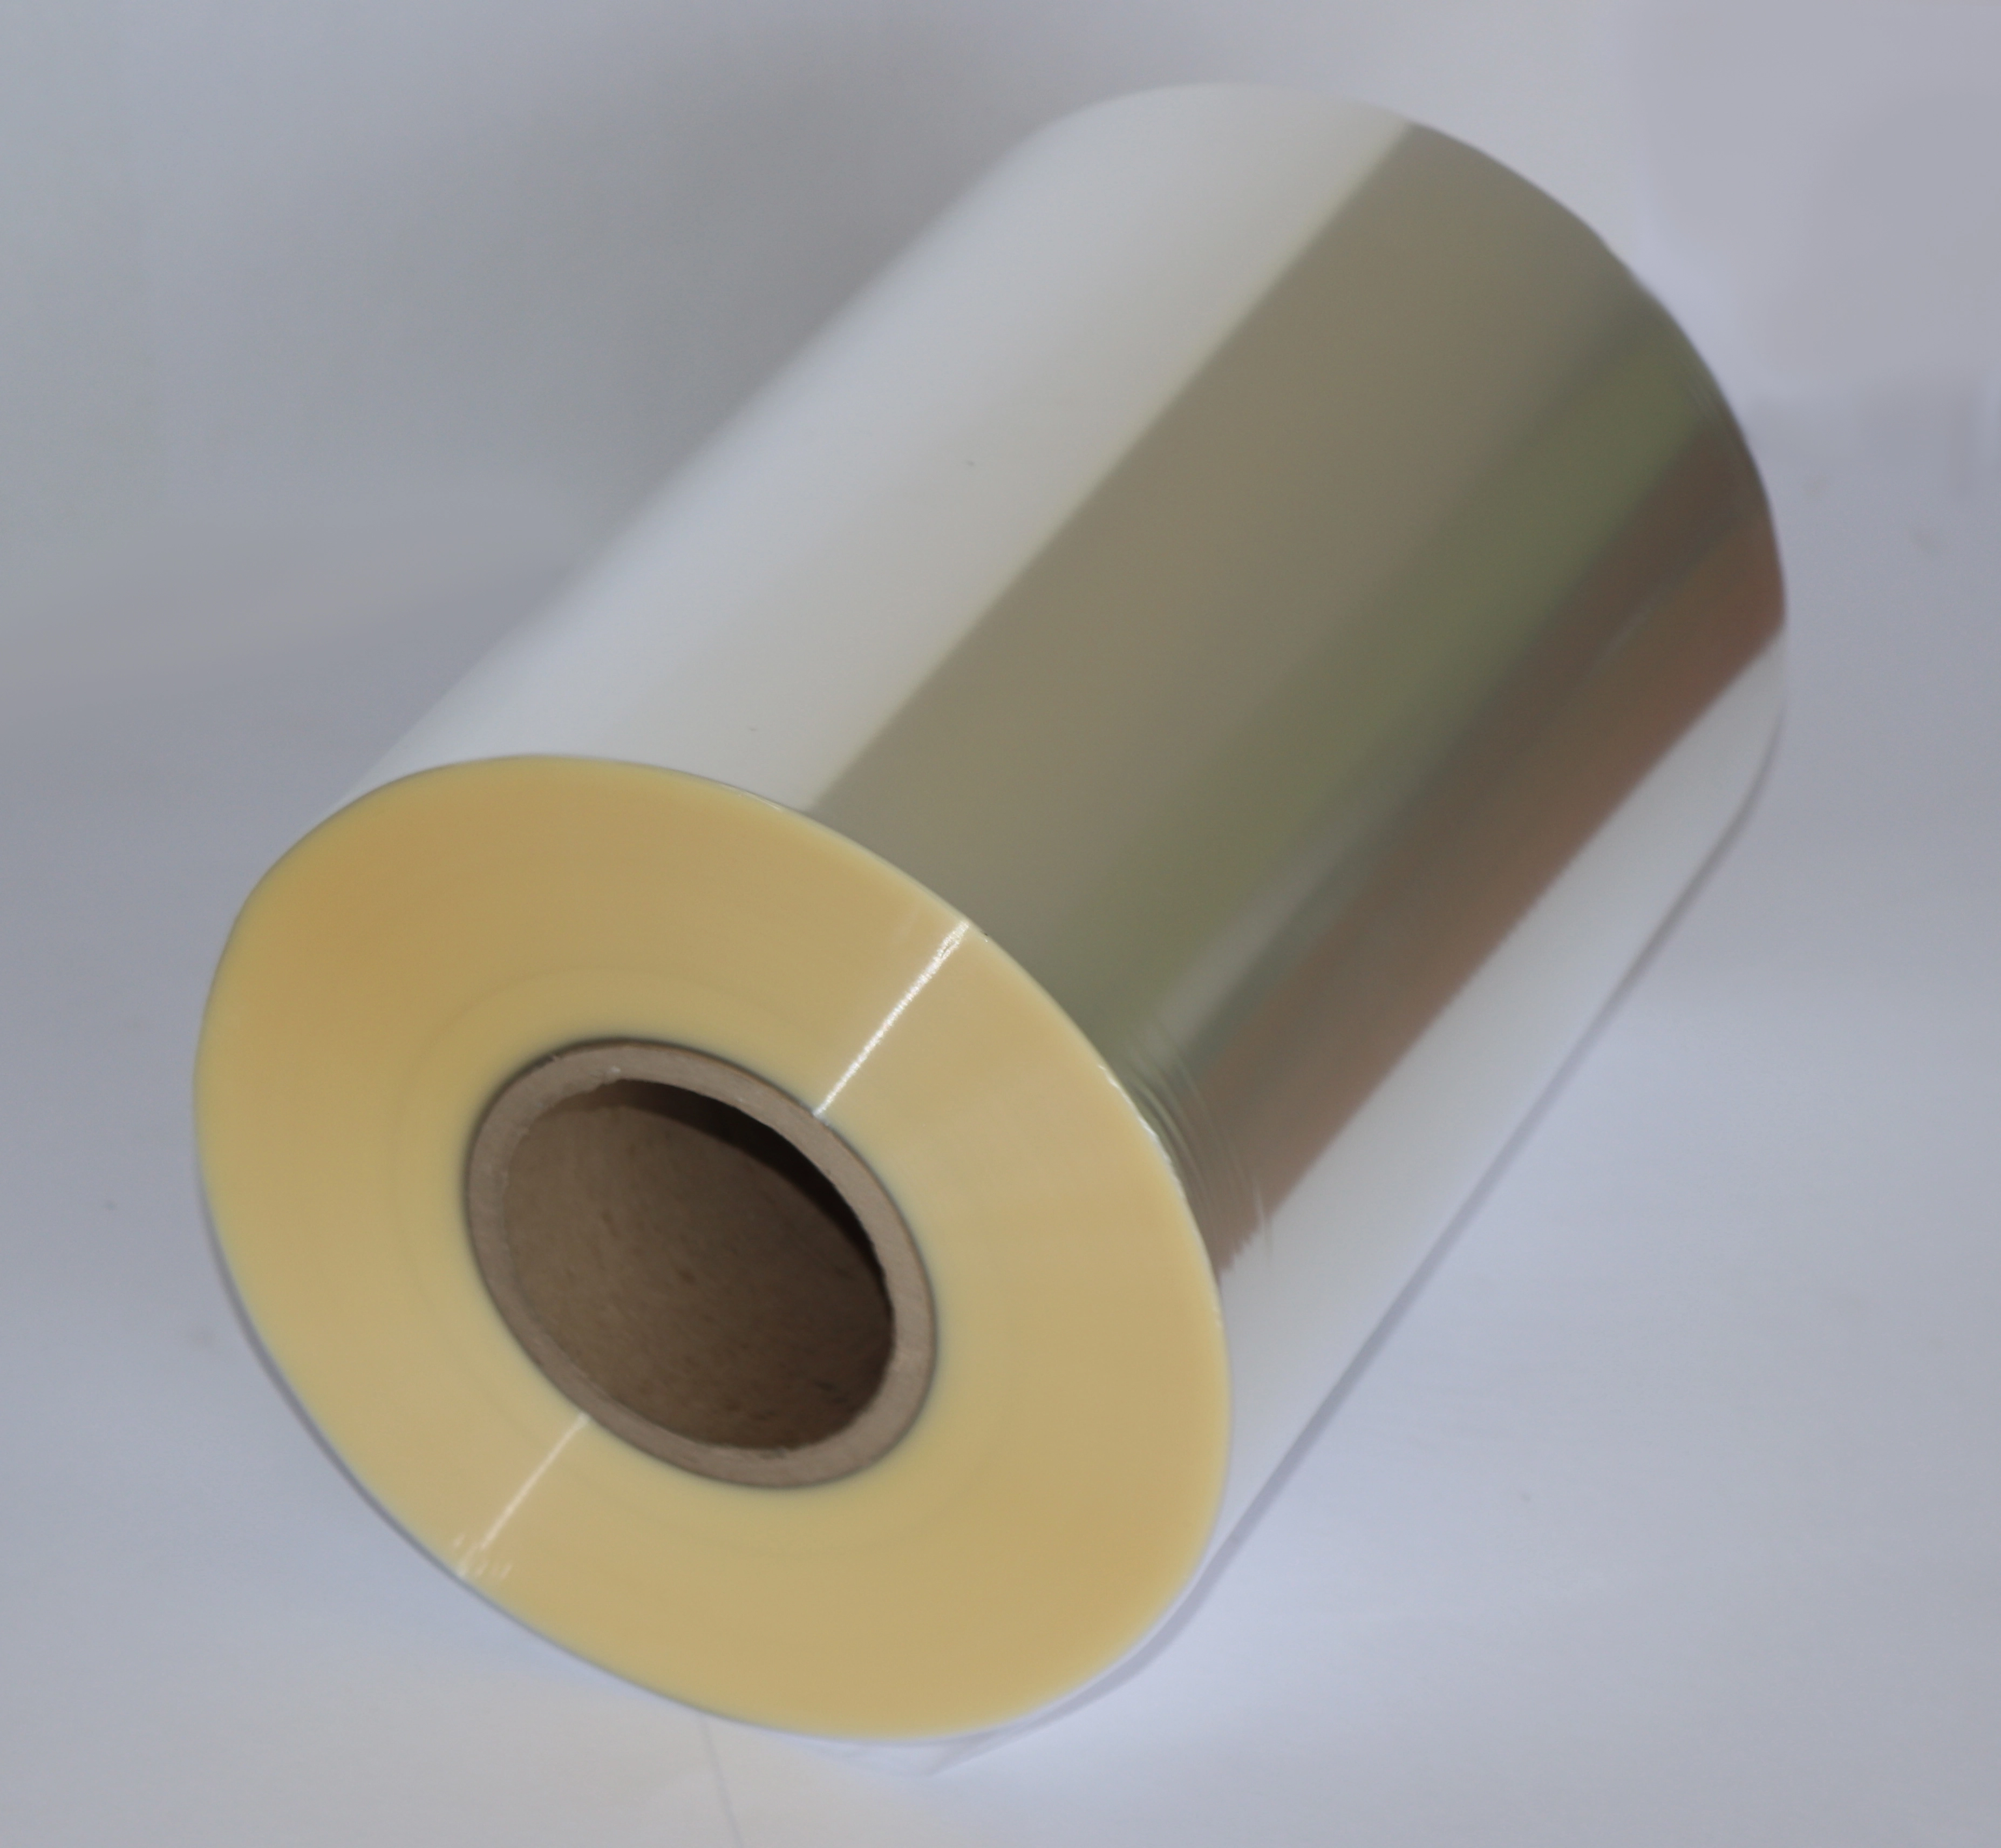 Laminating film for surface protection and moisture prevention sold by Easitape